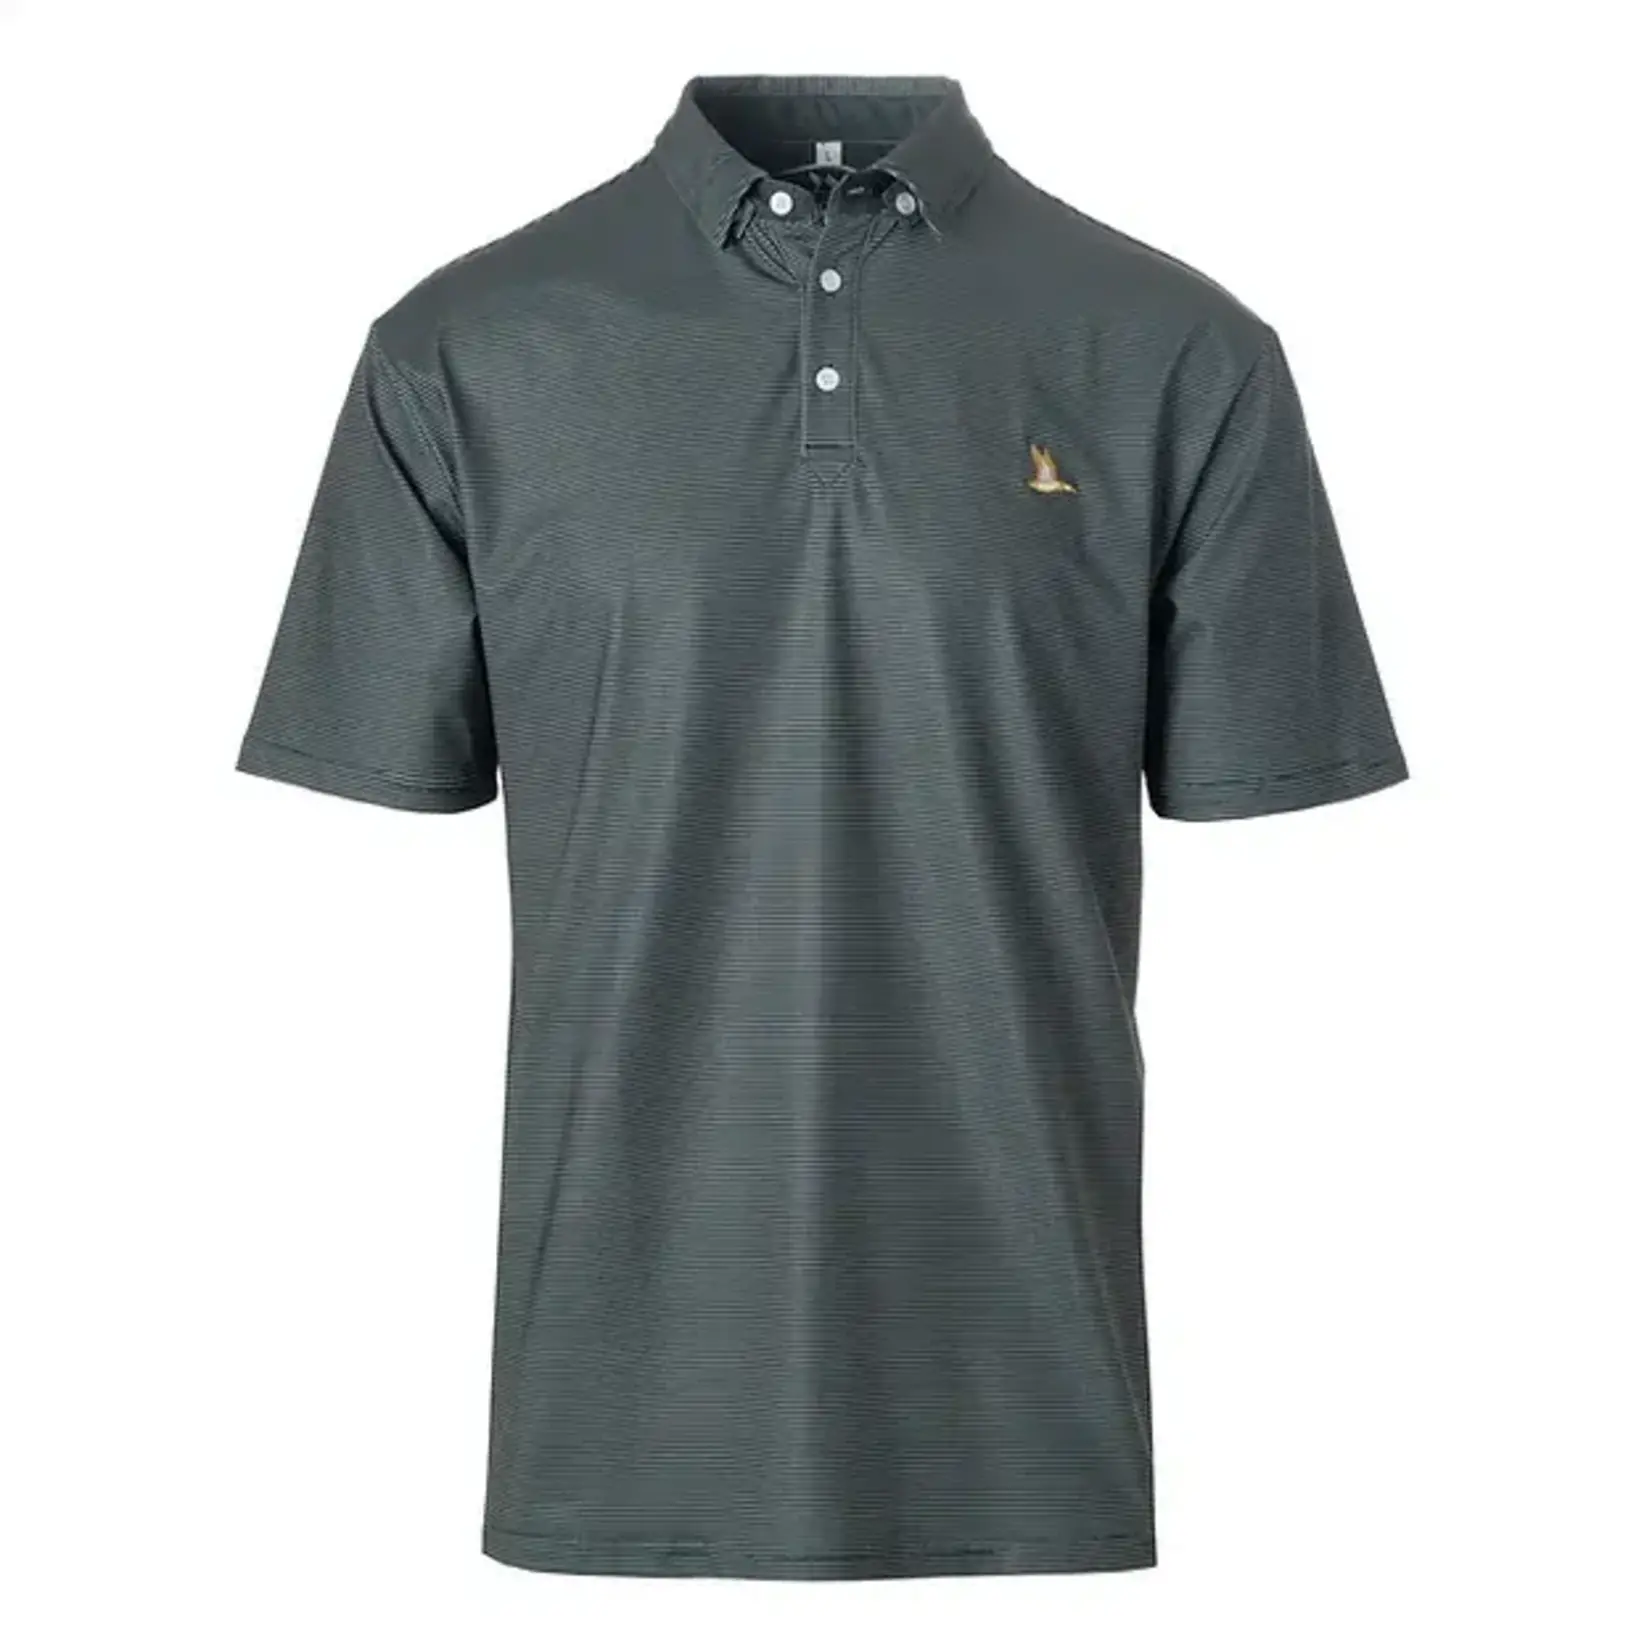 Roost Waterfowl Roost Waterfowl Men's Polo Shirt